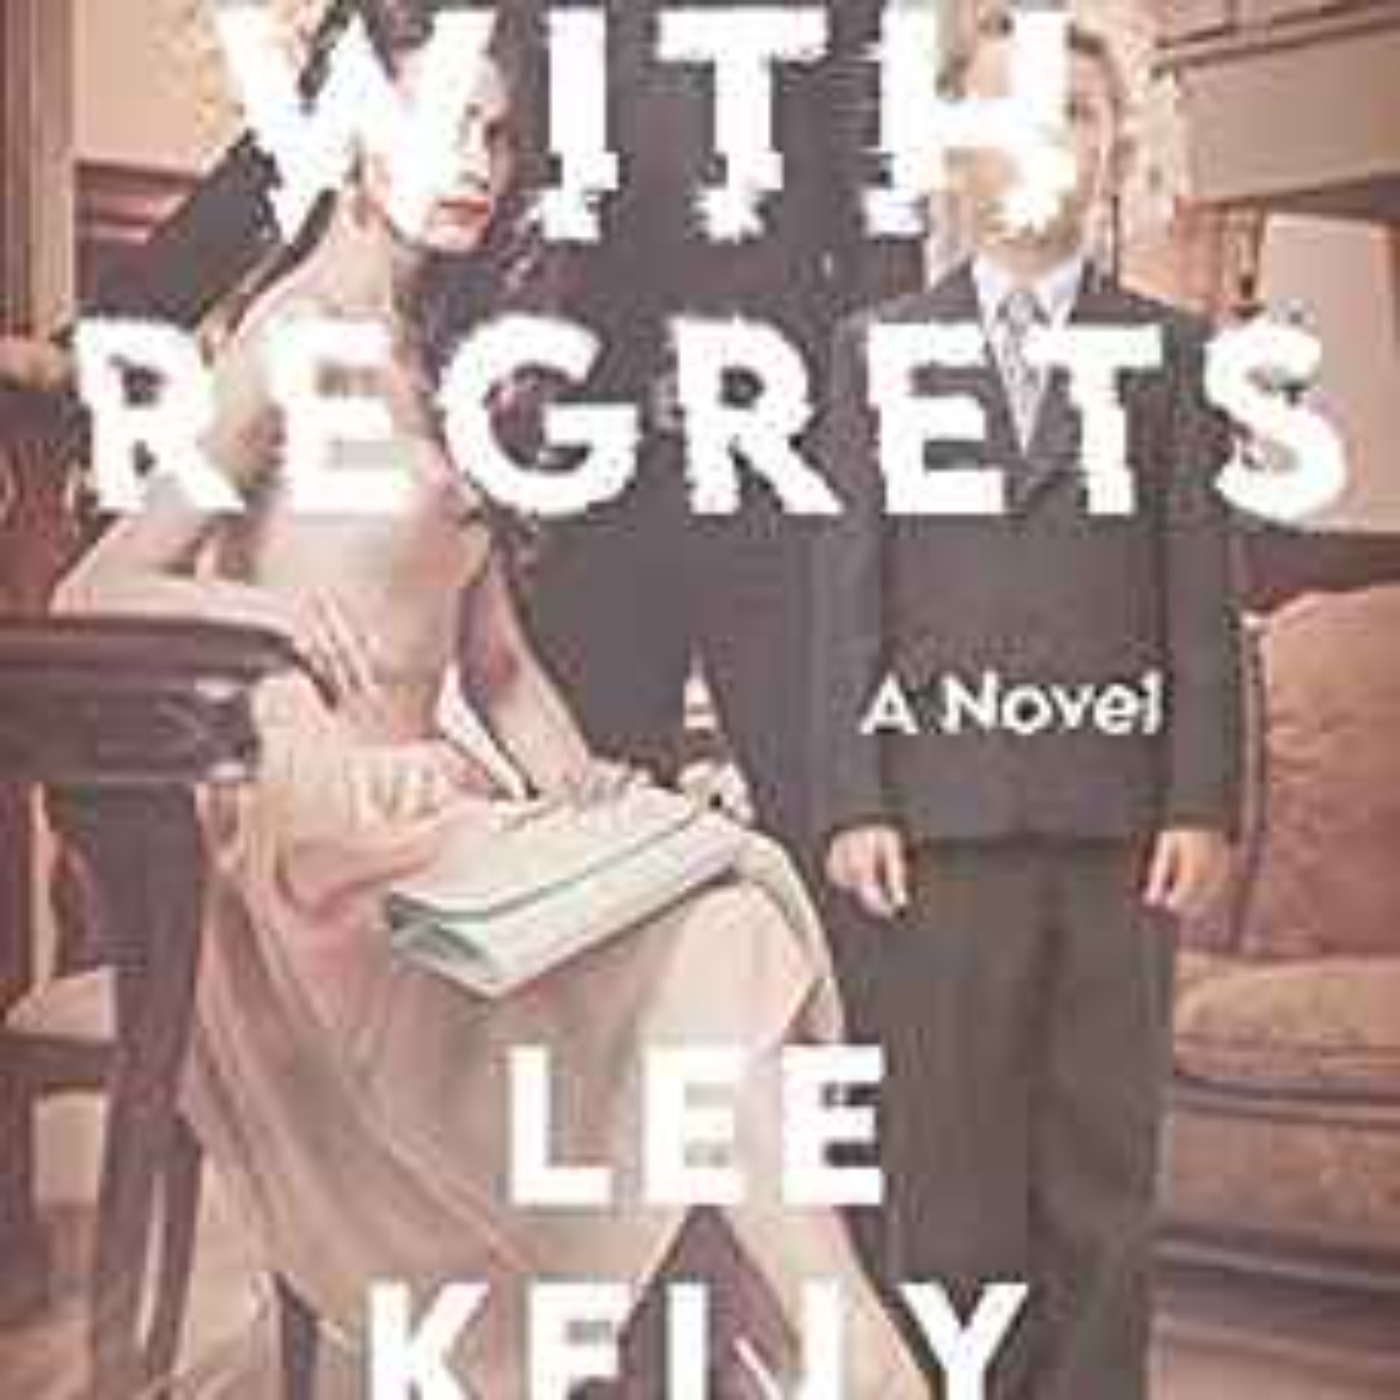 Lee Kelly - With Regrets : A Novel